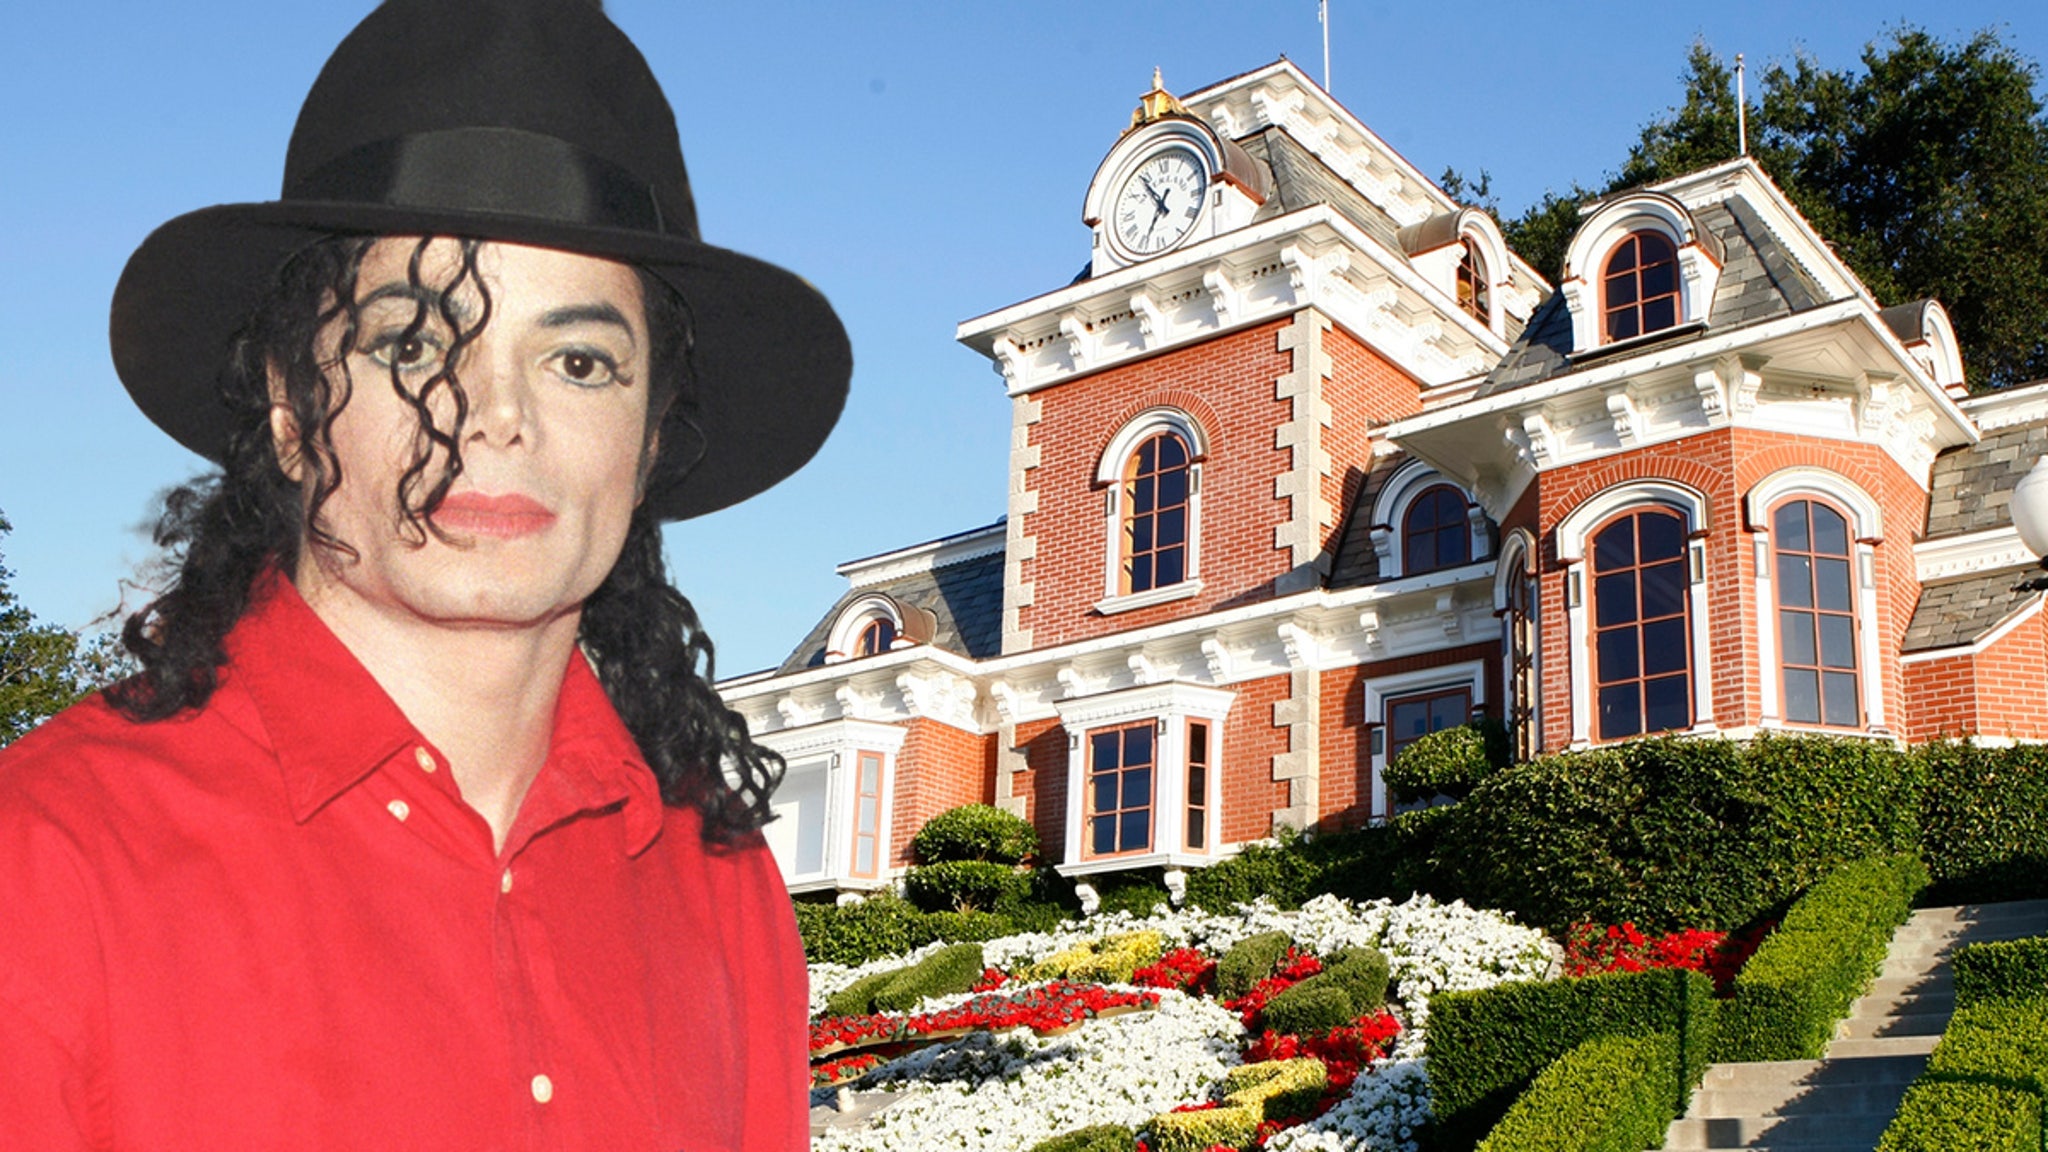 Statues of Michael Jackson Neverland Ranch for sale